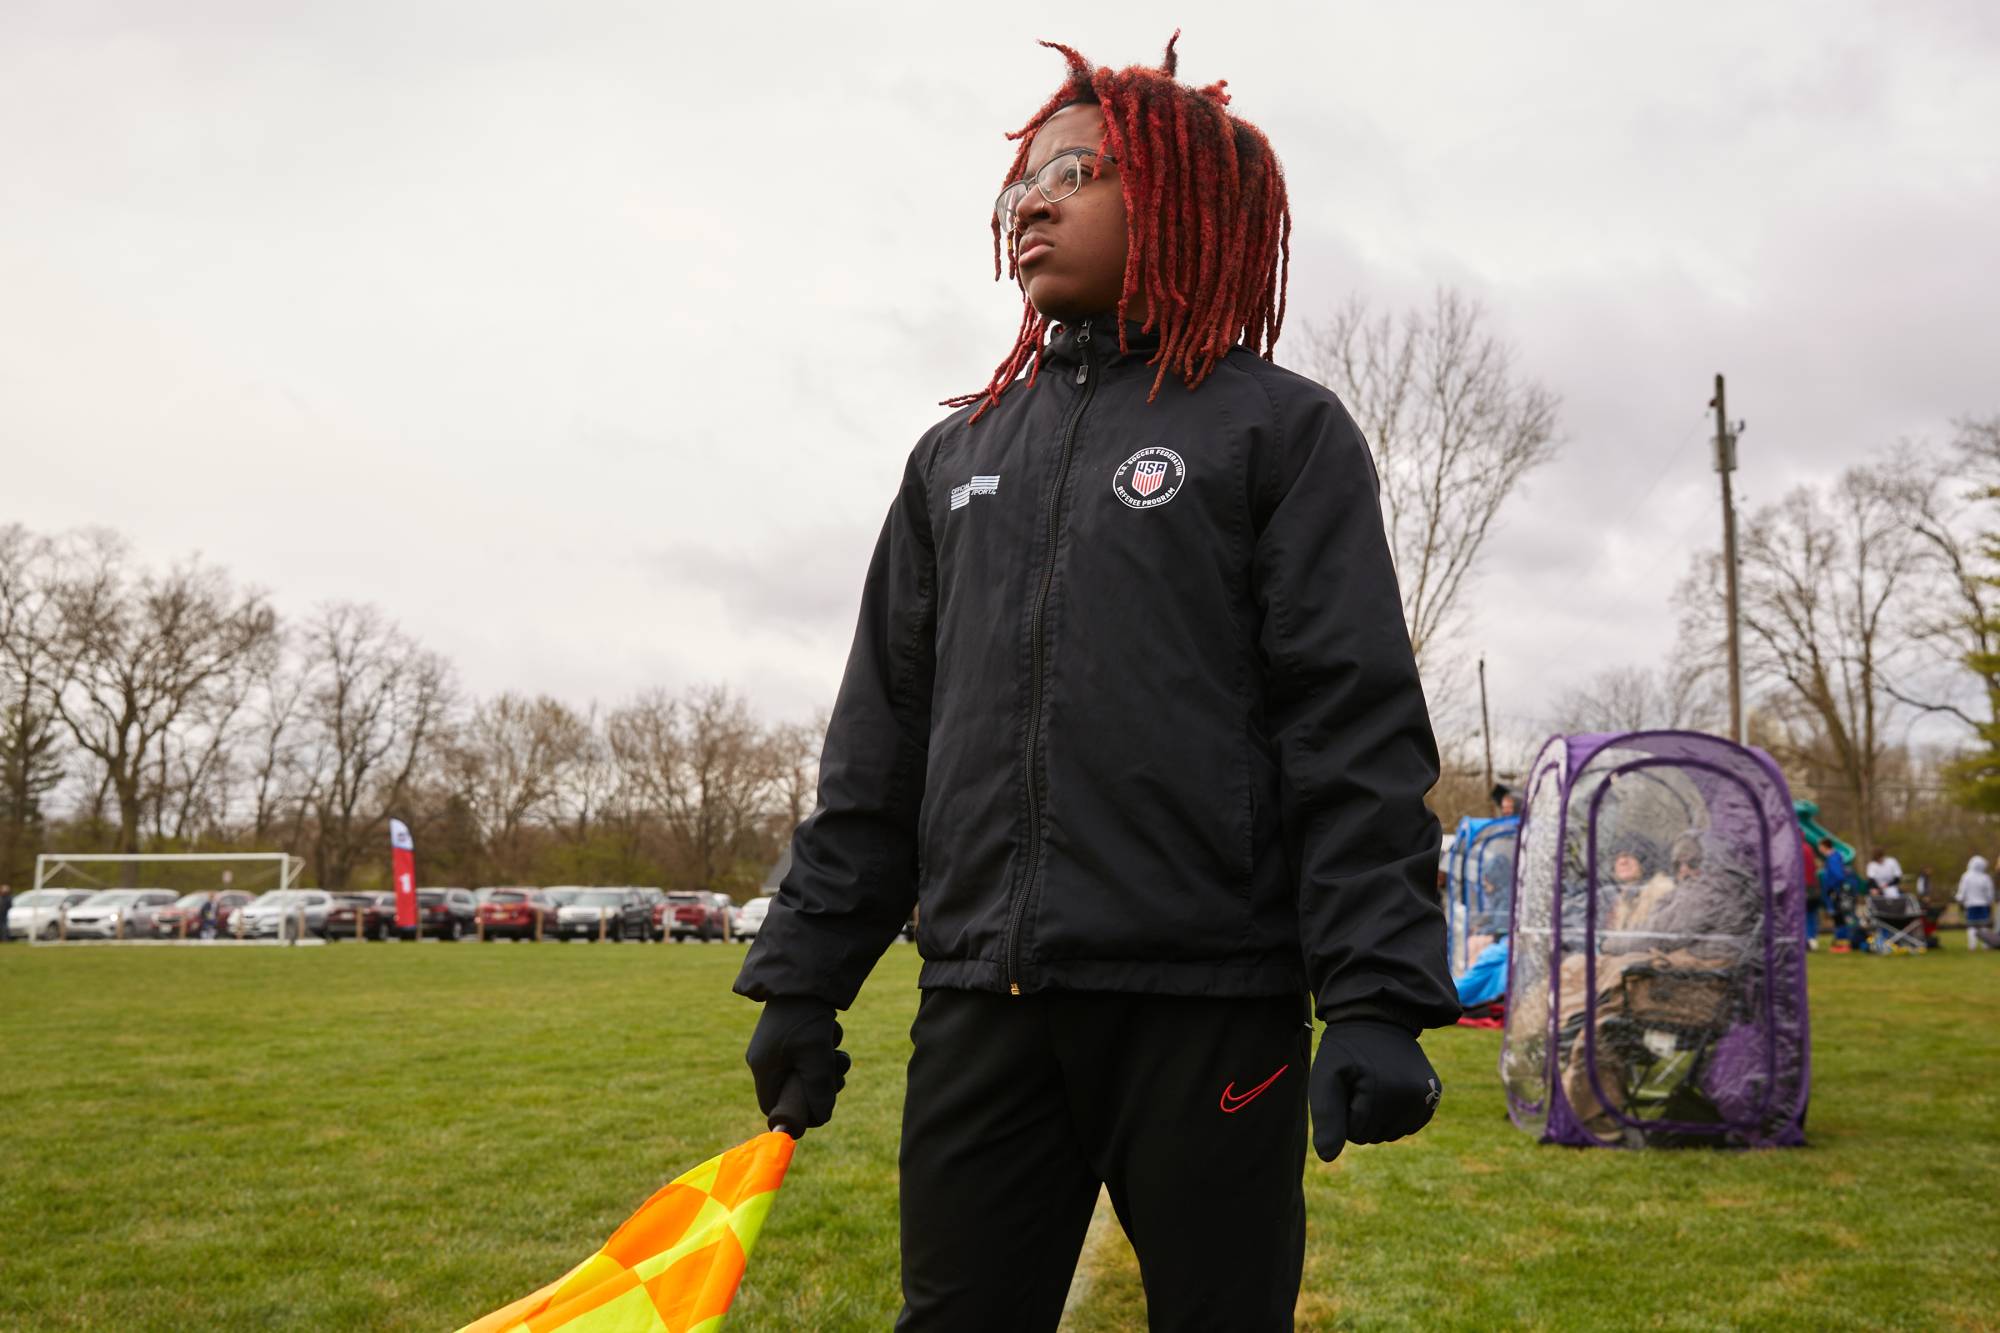 Tyrek Greene serves as a line judge at a youth soccer match in Fairfield, Ohio, on April 9. For years, unruly parents have turned youth sporting events into a toxic environment — the cancellation of games and entire seasons over the last two years hastened an exodus of referees.  | BRIAN KAISER / THE NEW YORK TIMES